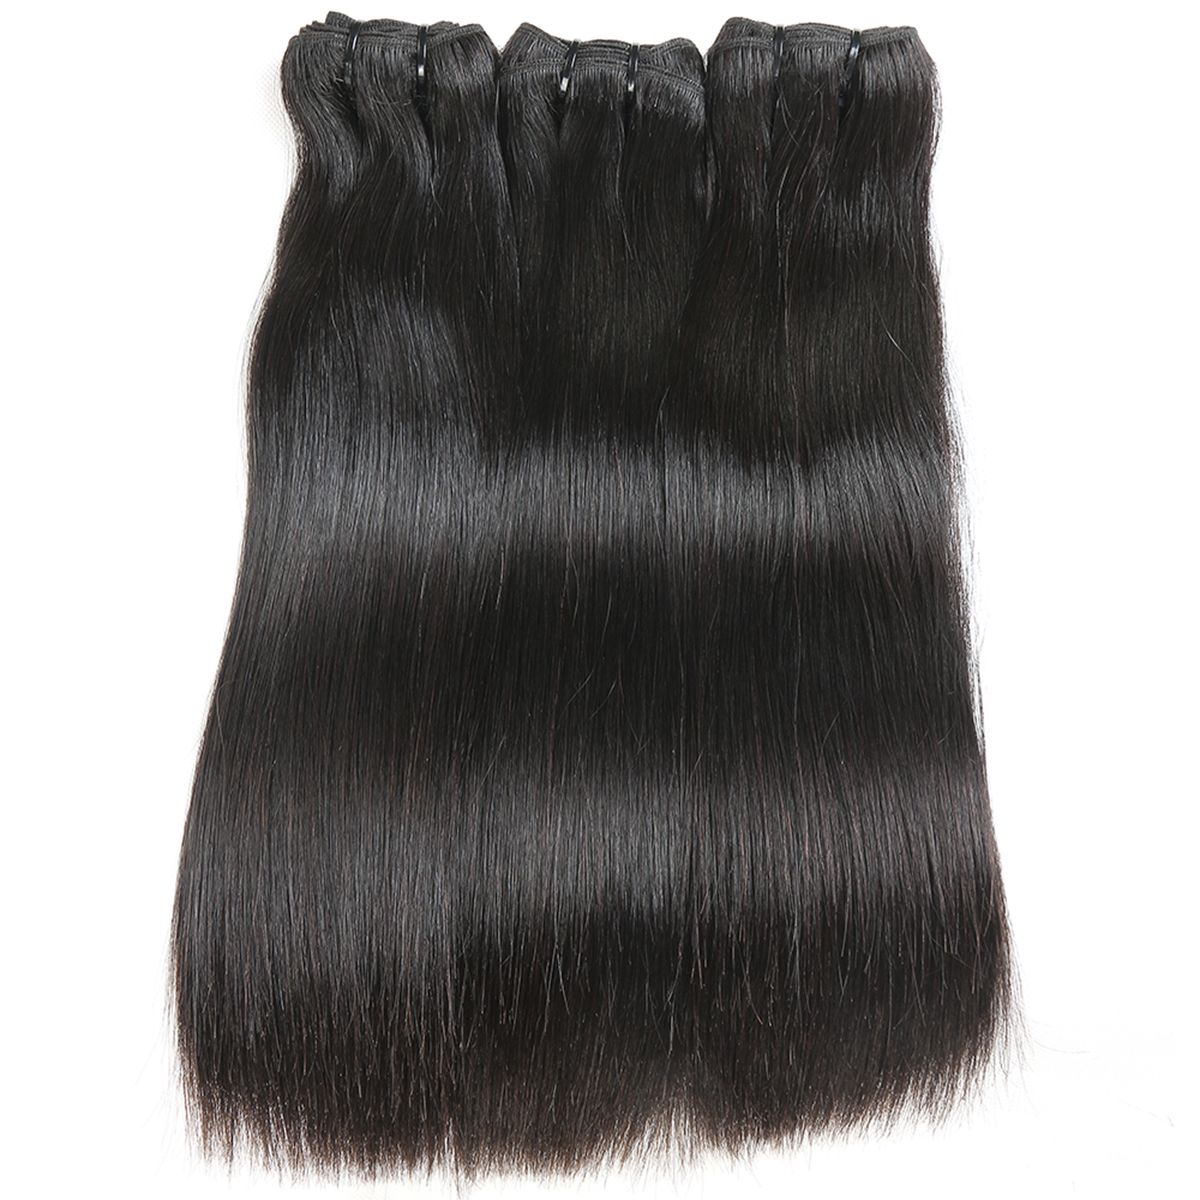 Double Drawn All Textures Raw Virgin Hair Bundles #1B Natural Black 10-30inch All Cuticles Intact And Aligned